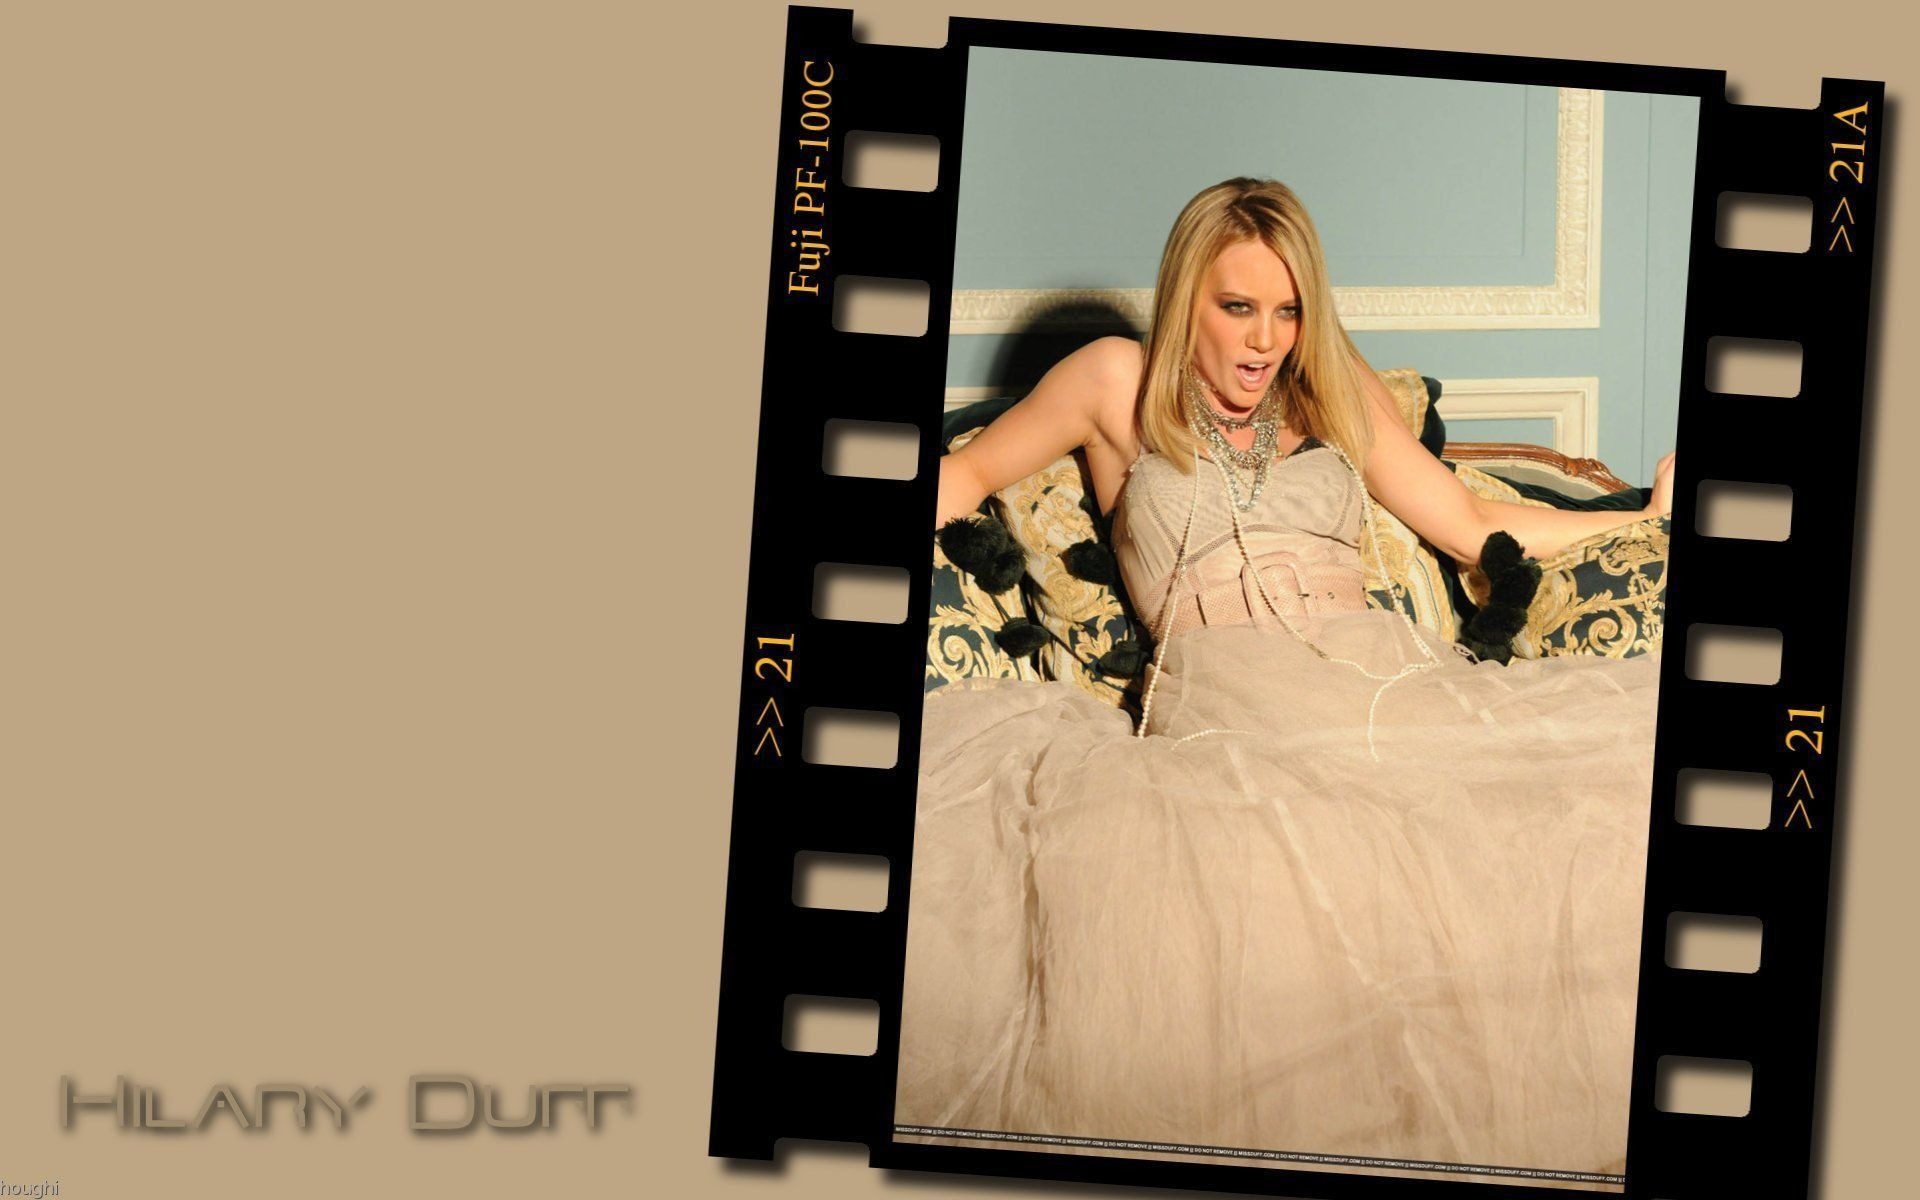 Hilary Duff #025 - 1920x1200 Wallpapers Pictures Photos Images